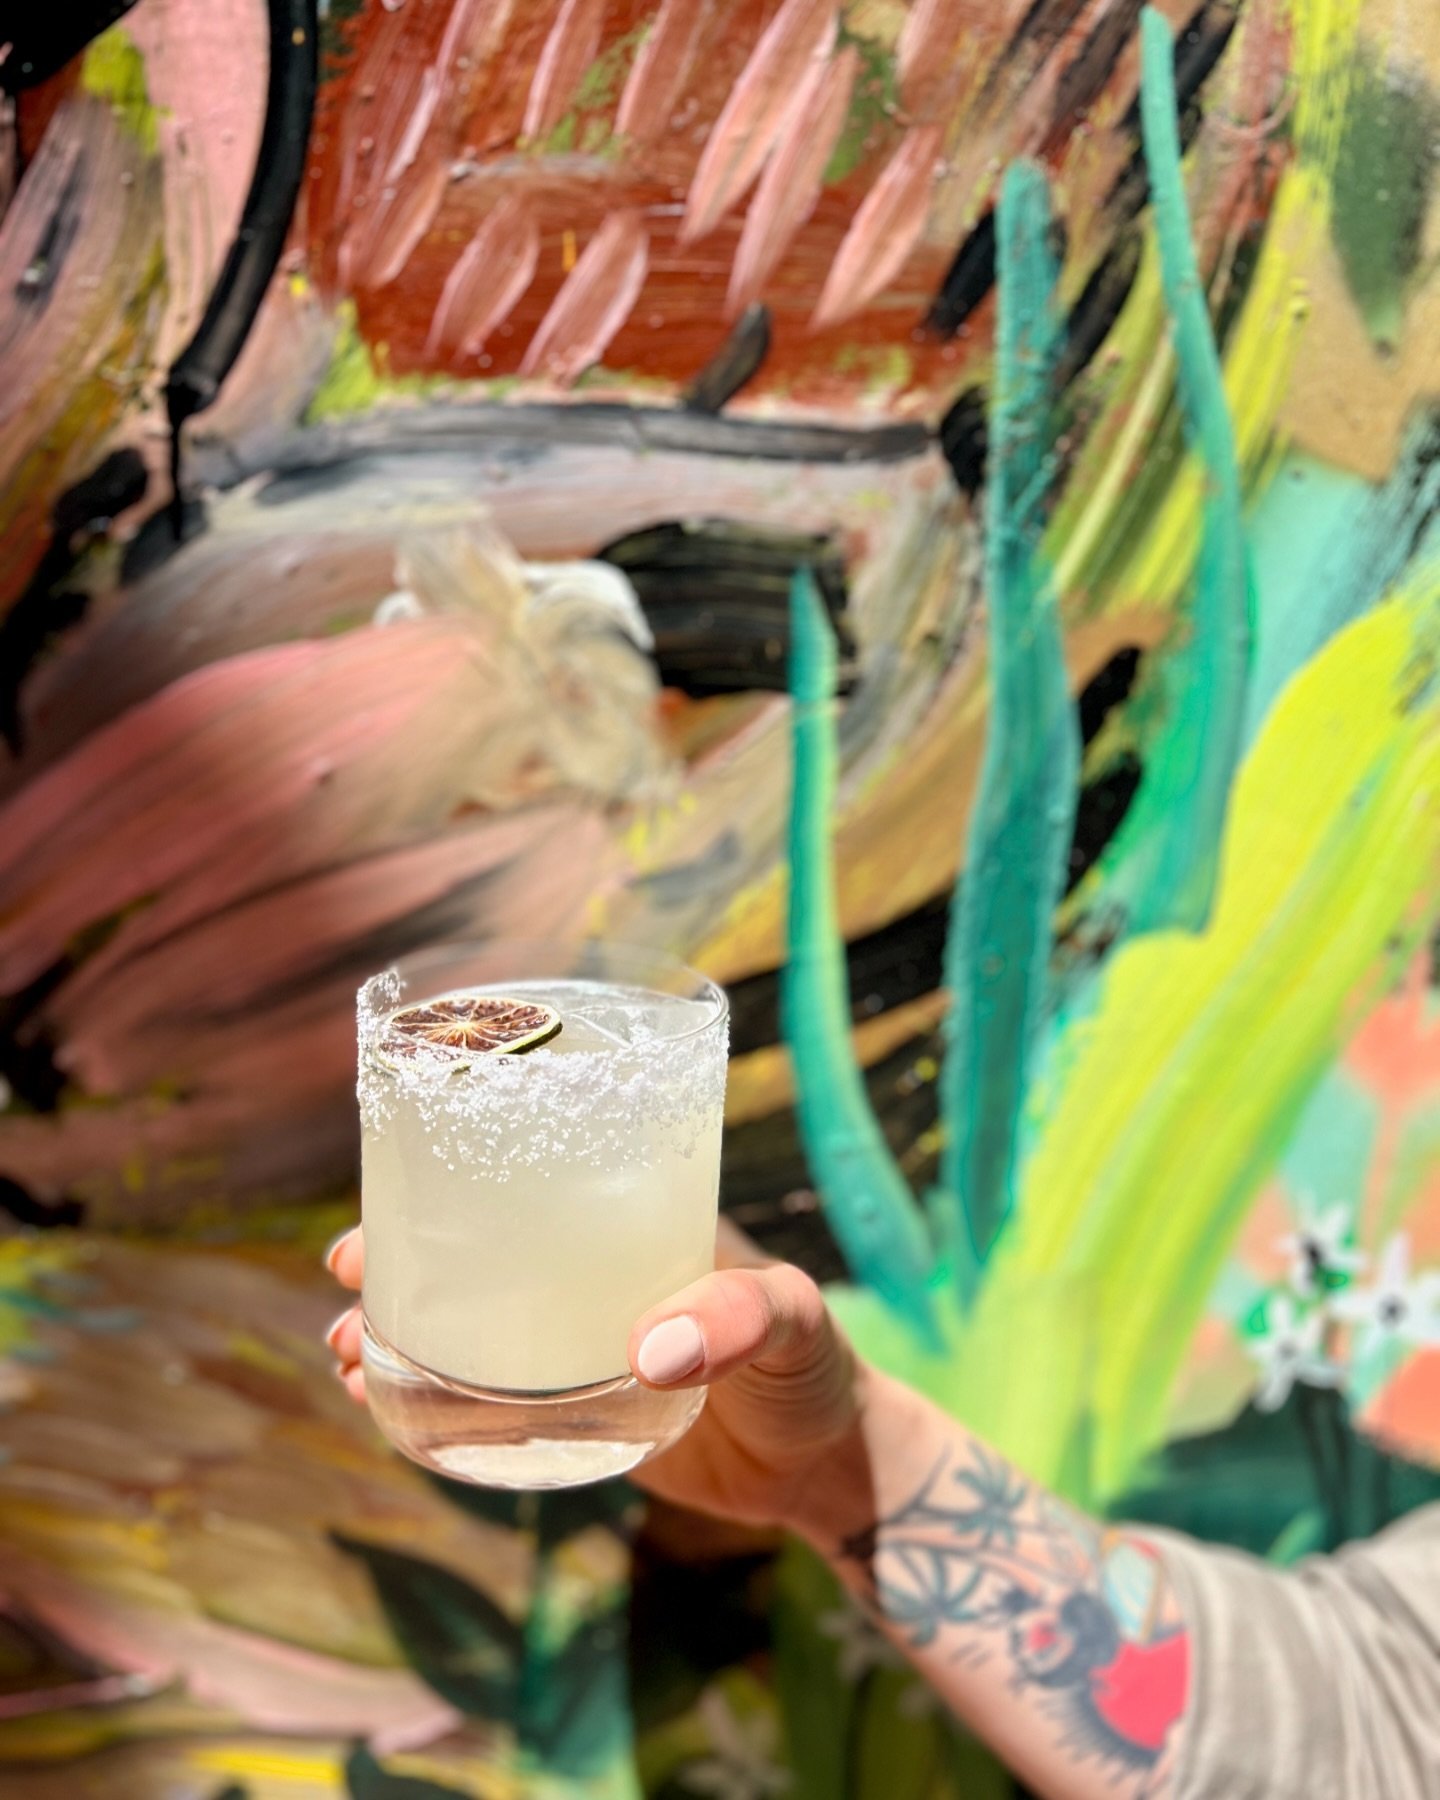 Happy weekend, friends! Grab a seat at the bar this Sunday for a $8 margaritas. Now the only question is spicy or not spicy?🍹

#cocktailbar #visitsonoma #healdsburgca #winecountry #weekendplans #sfbayarea #veganeats #margaritatime